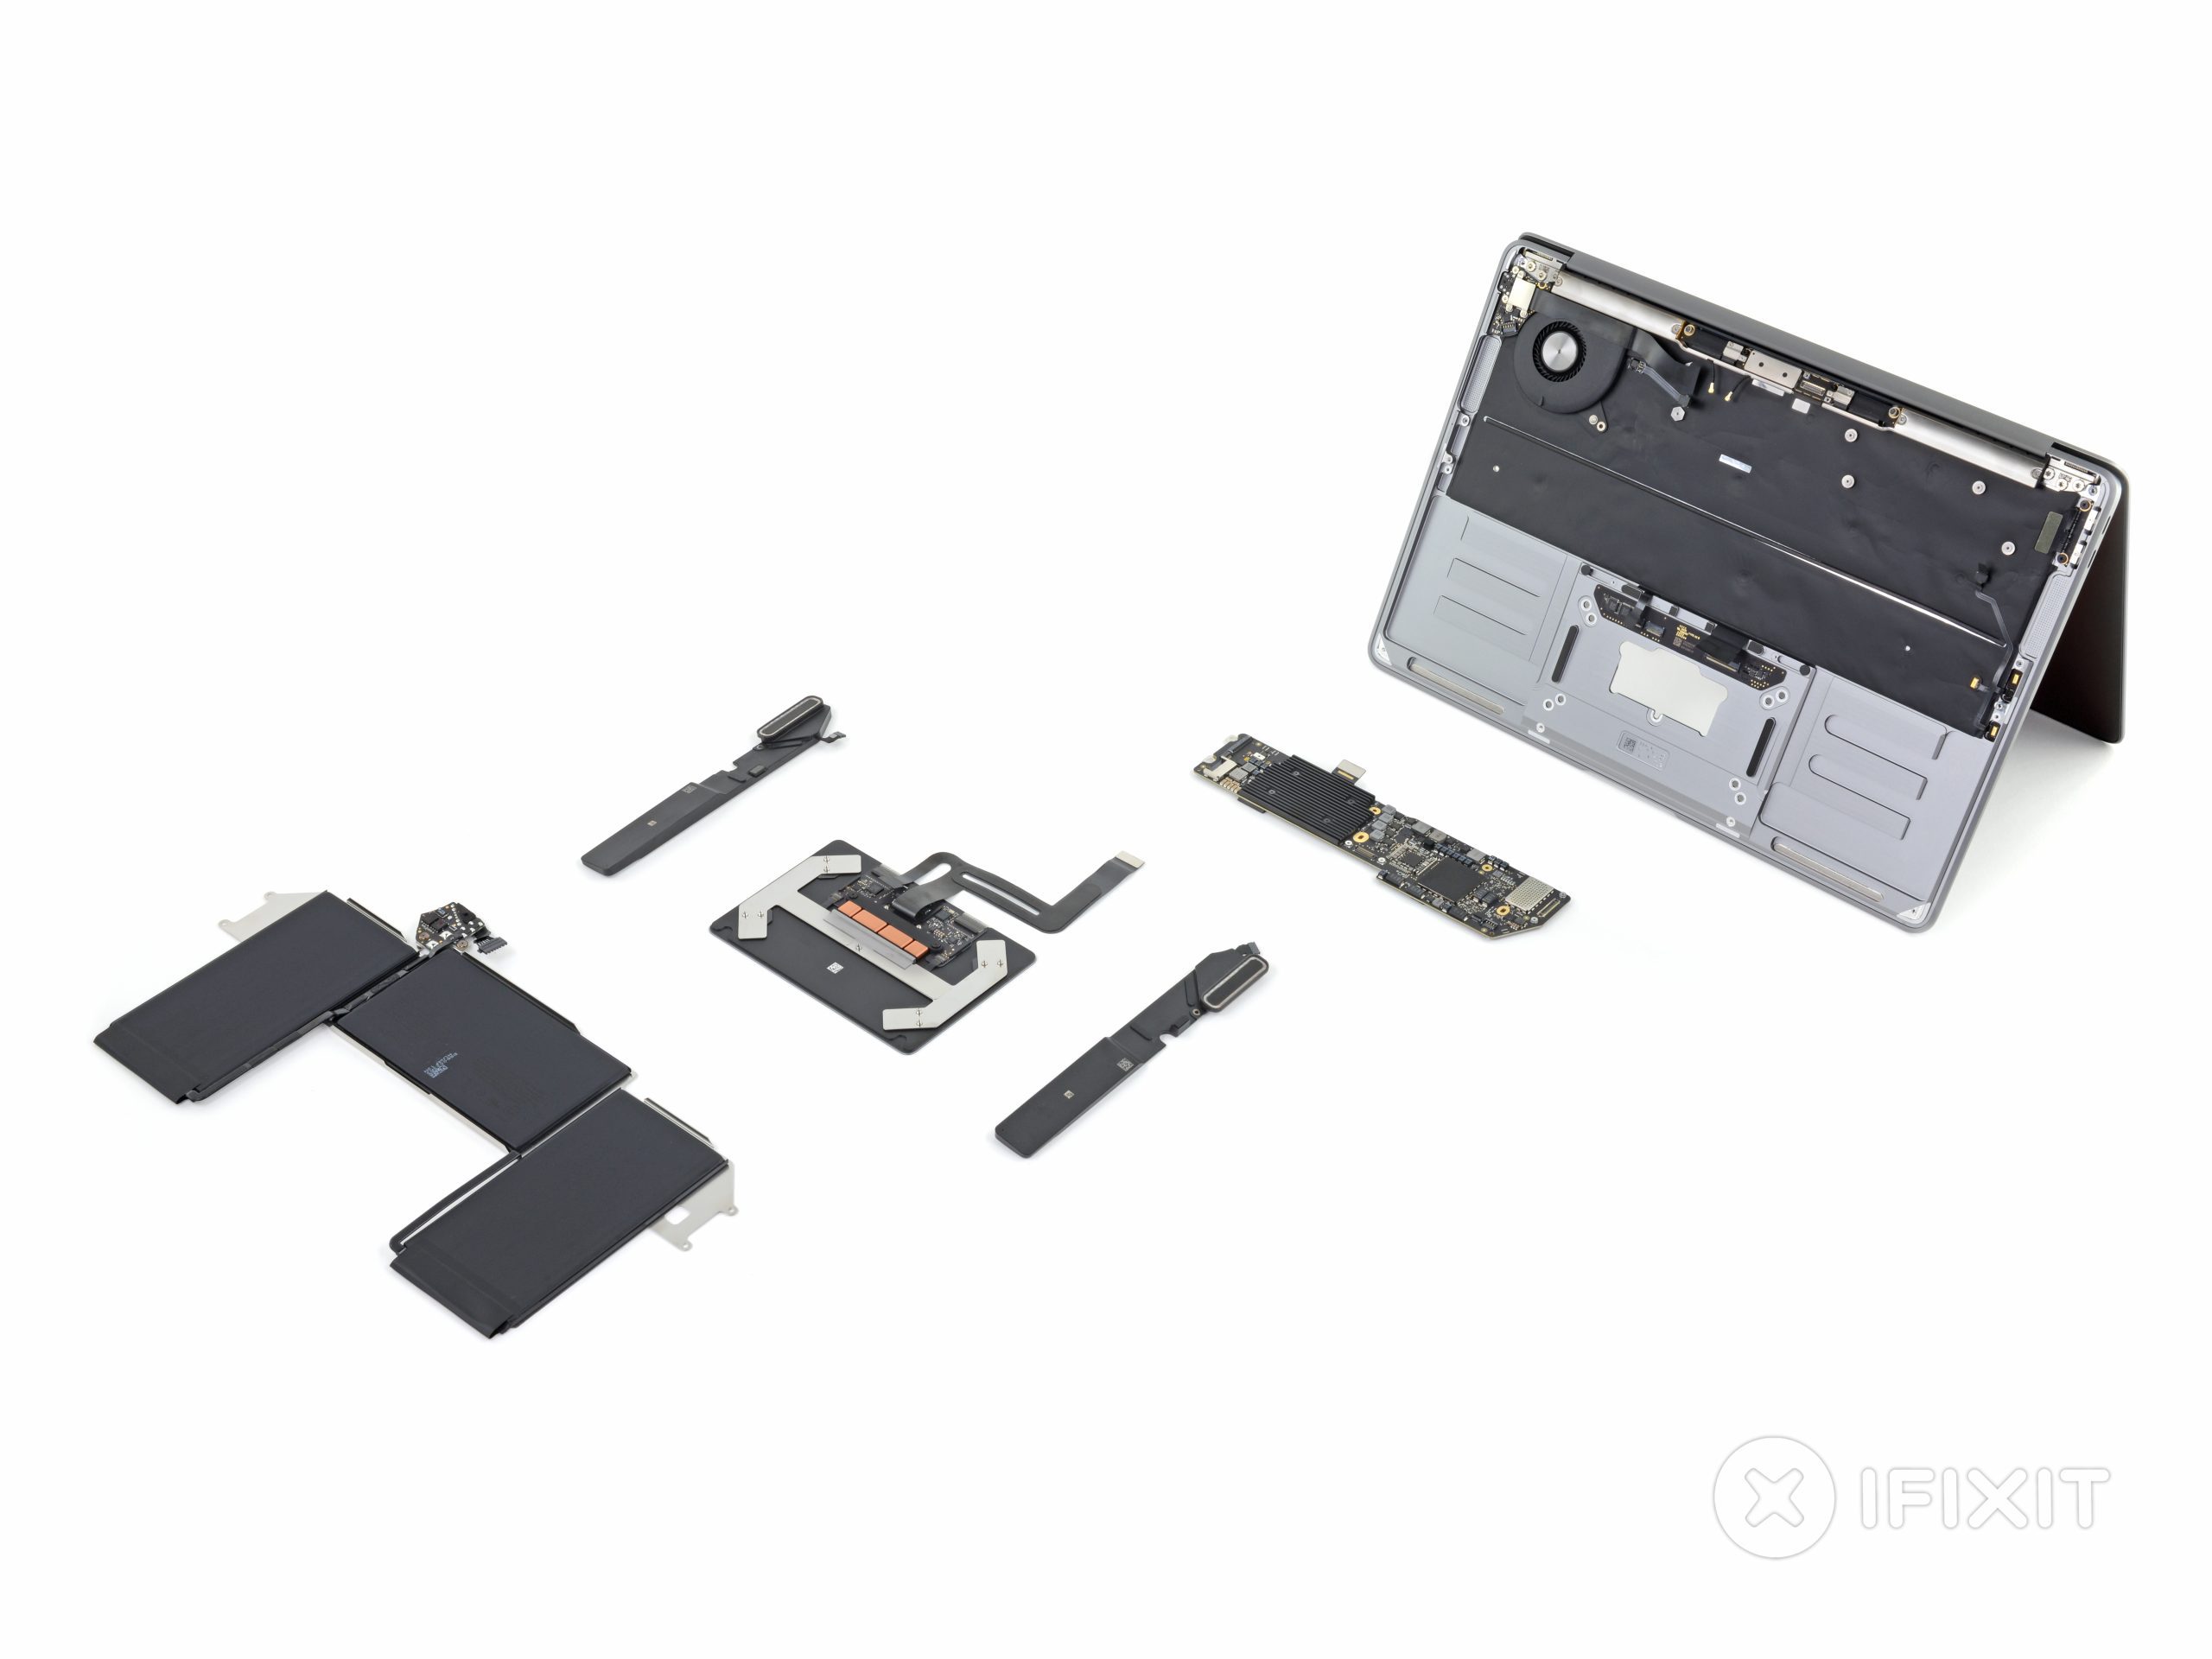 MacBook Air (2020) scores 4 on iFixit’s repairability scale